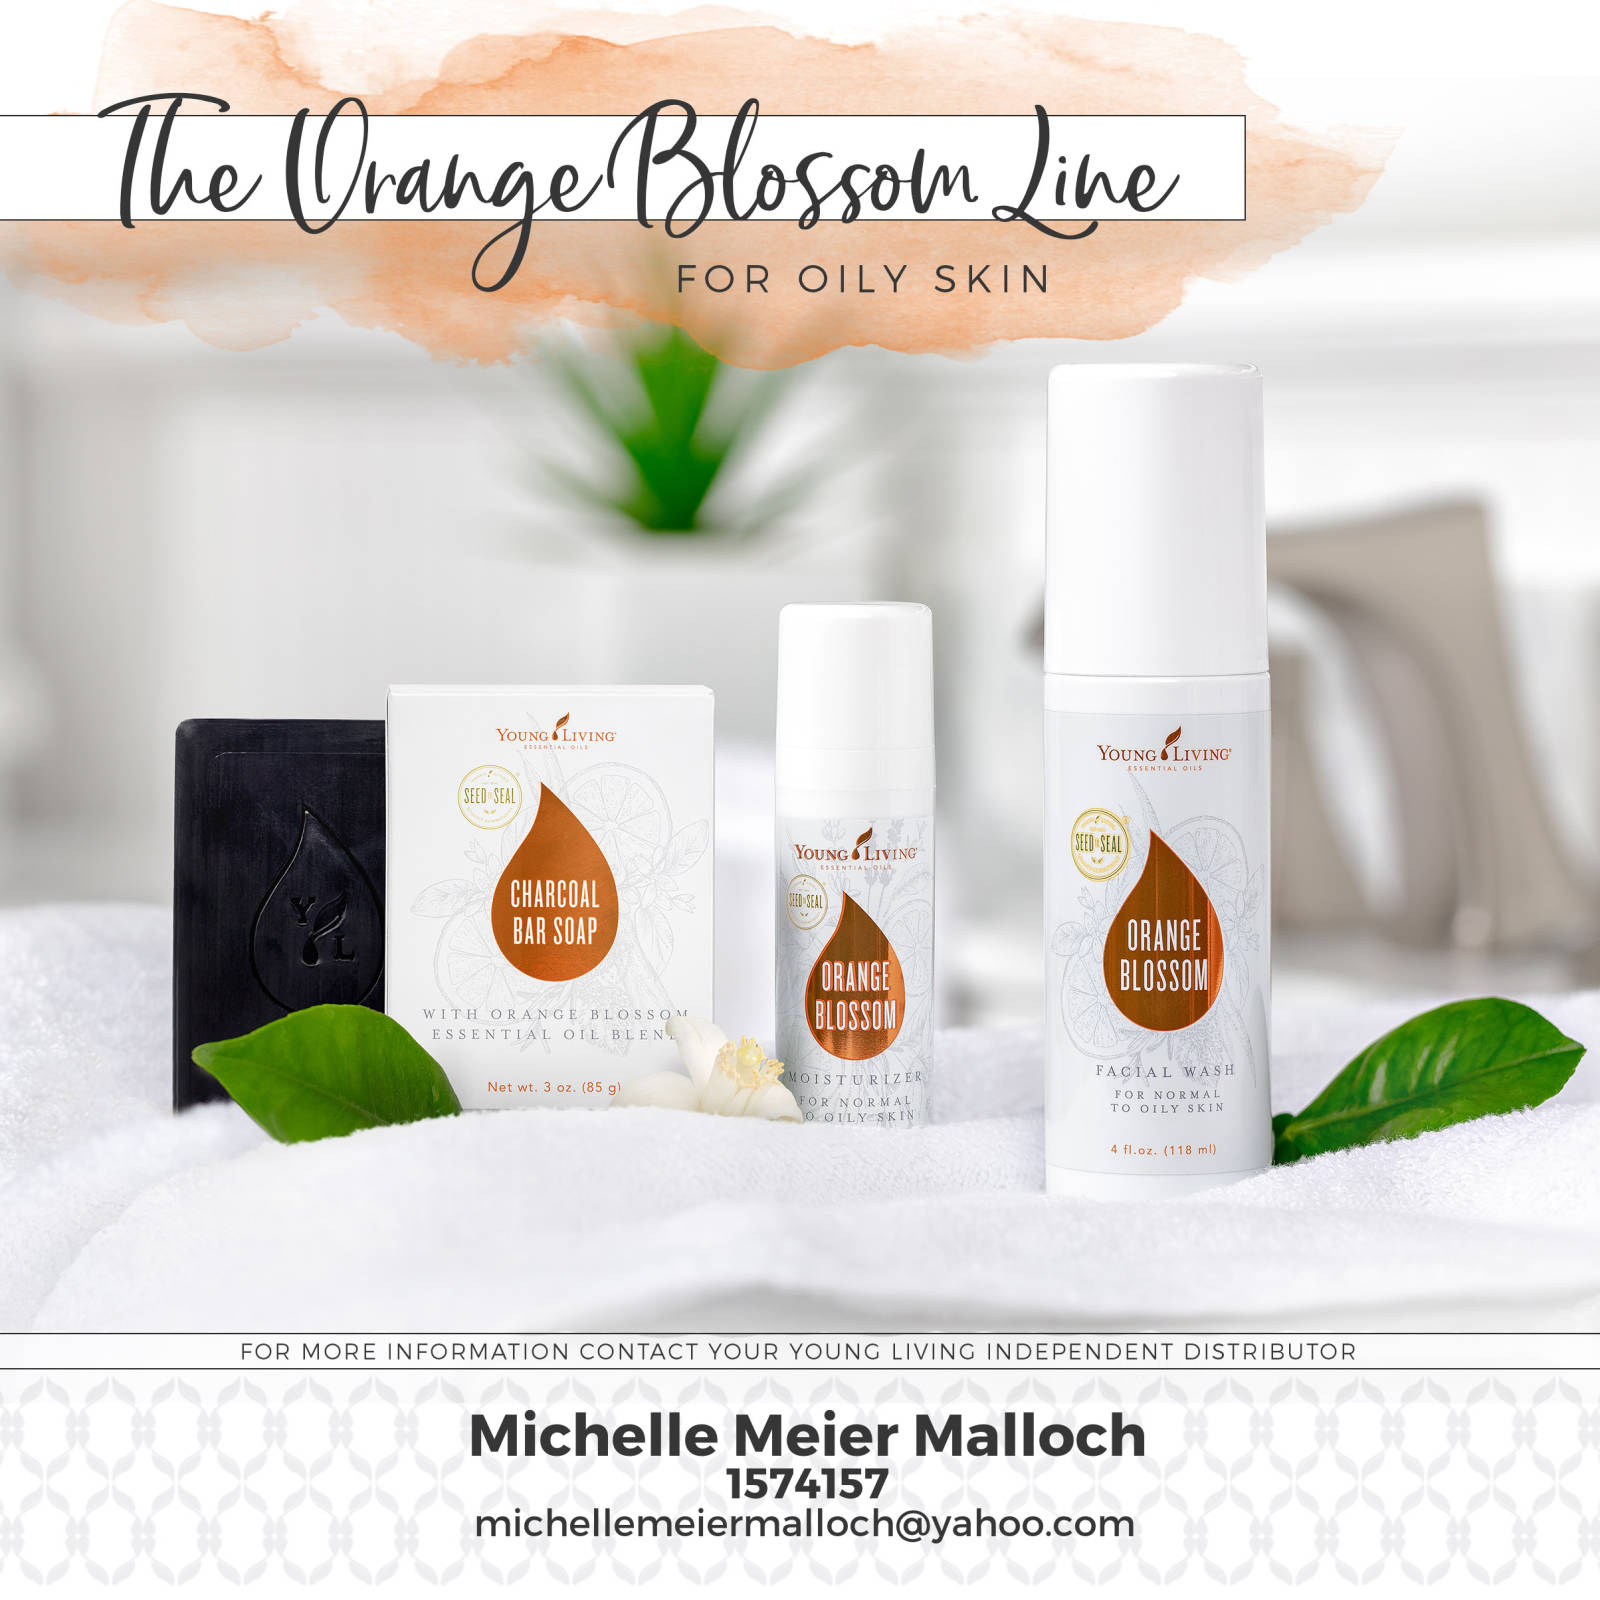 All NEW toxin free 3 step system for combination/oily and blemish prone skin!